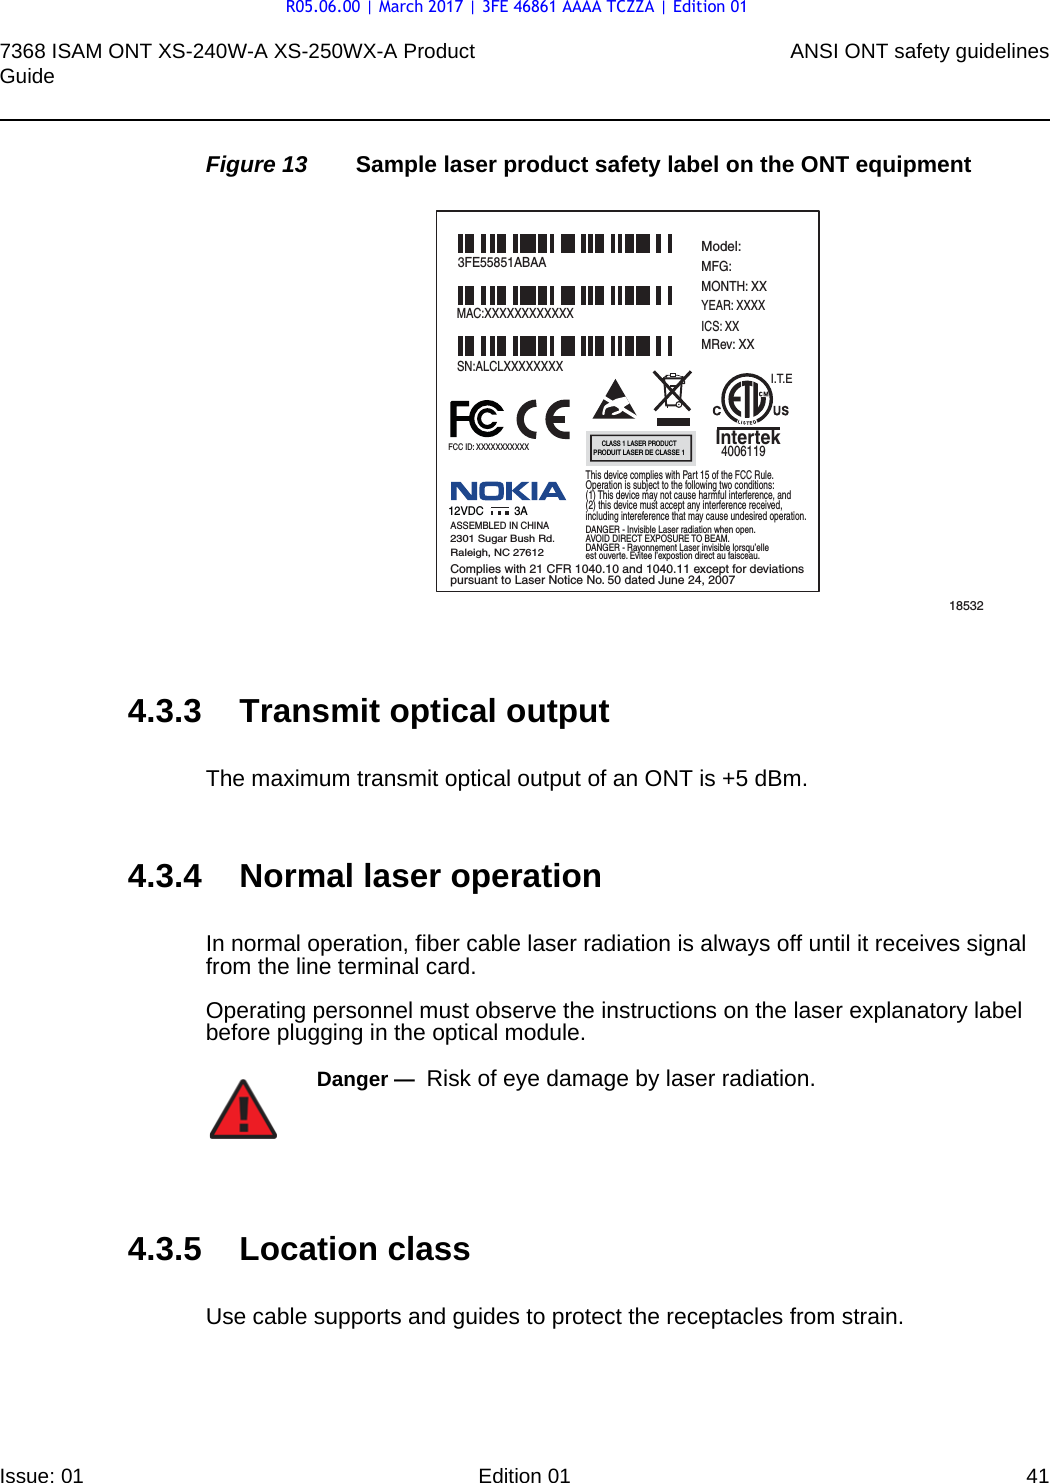 7368 ISAM ONT XS-240W-A XS-250WX-A Product Guide ANSI ONT safety guidelinesIssue: 01 Edition 01 41 Figure 13 Sample laser product safety label on the ONT equipment4.3.3 Transmit optical outputThe maximum transmit optical output of an ONT is +5 dBm.4.3.4 Normal laser operationIn normal operation, fiber cable laser radiation is always off until it receives signal from the line terminal card.Operating personnel must observe the instructions on the laser explanatory label before plugging in the optical module.4.3.5 Location classUse cable supports and guides to protect the receptacles from strain.185323FE55851ABAAModel:MFG:MONTH: XXYEAR: XXXXICS: XXMRev: XX MAC:XXXXXXXXXXXXSN:ALCLXXXXXXXXFCC ID: XXXXXXXXXXXThis device complies with Part 15 of the FCC Rule.Operation is subject to the following two conditions:(1) This device may not cause harmful interference, and(2) this device must accept any interference received,including intereference that may cause undesired operation. ASSEMBLED IN CHINA2301 Sugar Bush Rd.Raleigh, NC 27612DANGER - Invisible Laser radiation when open.AVOID DIRECT EXPOSURE TO BEAM.DANGER - Rayonnement Laser invisible lorsqu’elleest ouverte. Evitee l’expostion direct au faisceau.Complies with 21 CFR 1040.10 and 1040.11 except for deviationspursuant to Laser Notice No. 50 dated June 24, 200712VDC 3AI.T.EIntertek4006119CLASS 1 LASER PRODUCTPRODUIT LASER DE CLASSE 1Danger —  Risk of eye damage by laser radiation.R05.06.00 | March 2017 | 3FE 46861 AAAA TCZZA | Edition 01